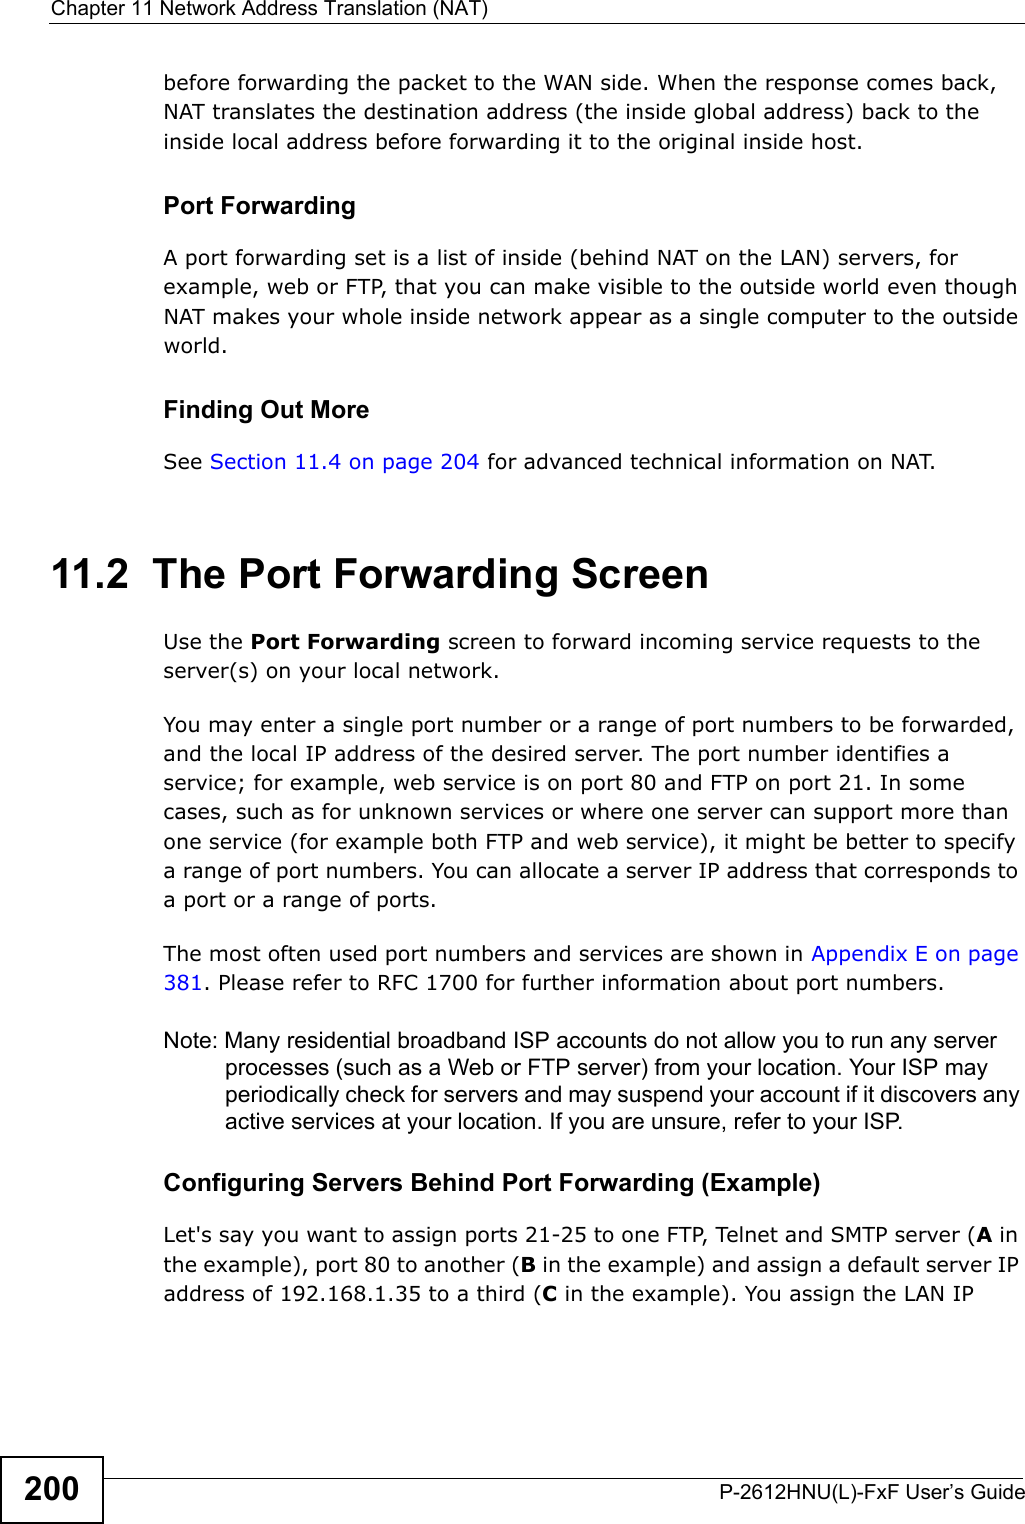 Chapter 11 Network Address Translation (NAT)P-2612HNU(L)-FxF User’s Guide200before forwarding the packet to the WAN side. When the response comes back,NAT translates the destination address (the inside global address) back to the inside local address before forwarding it to the original inside host.Port ForwardingA port forwarding set is a list of inside (behind NAT on the LAN) servers, for example, web or FTP, that you can make visible to the outside world even though NAT makes your whole inside network appear as a single computer to the outside world.Finding Out MoreSee Section 11.4 on page 204 for advanced technical information on NAT.11.2  The Port Forwarding Screen Use the Port Forwarding screen to forward incoming service requests to the server(s) on your local network.You may enter a single port number or a range of port numbers to be forwarded,and the local IP address of the desired server. The port number identifies a service; for example, web service is on port 80 and FTP on port 21. In some cases, such as for unknown services or where one server can support more than one service (for example both FTP and web service), it might be better to specify a range of port numbers. You can allocate a server IP address that corresponds to a port or a range of ports.The most often used port numbers and services are shown in Appendix E on page 381. Please refer to RFC 1700 for further information about port numbers. Note: Many residential broadband ISP accounts do not allow you to run any server processes (such as a Web or FTP server) from your location. Your ISP may periodically check for servers and may suspend your account if it discovers any active services at your location. If you are unsure, refer to your ISP.Configuring Servers Behind Port Forwarding (Example)Let&apos;s say you want to assign ports 21-25 to one FTP, Telnet and SMTP server (A in the example), port 80 to another (B in the example) and assign a default server IP address of 192.168.1.35 to a third (C in the example). You assign the LAN IP 